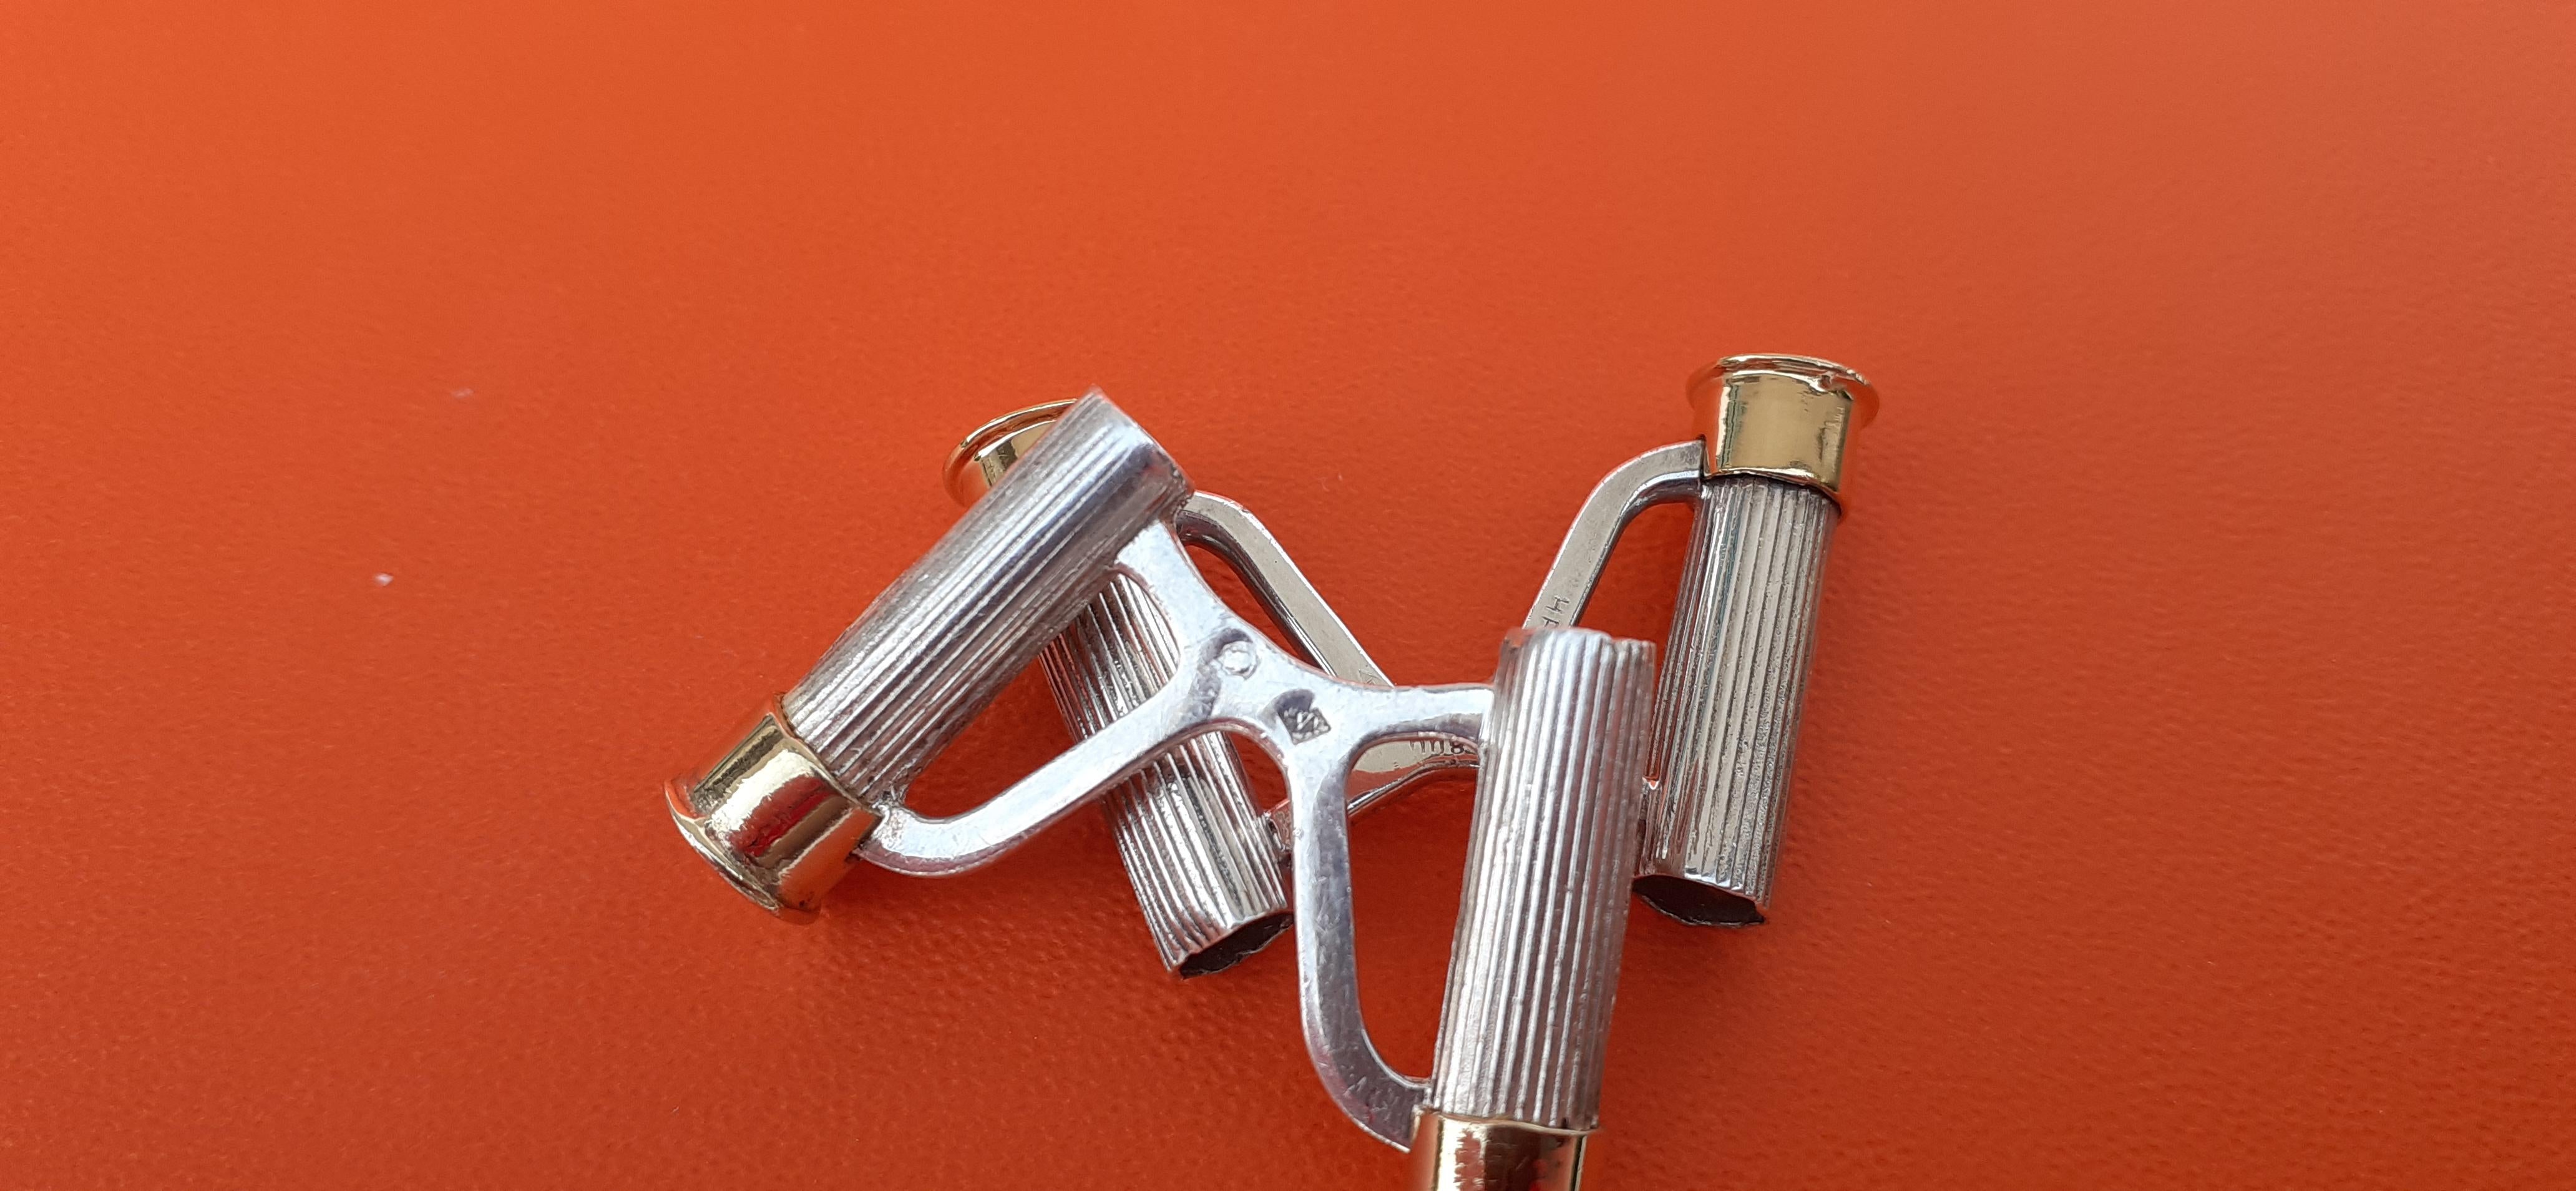 Exceptional Hermès Pair of Bullet Casing Shotgun Shell Cufflinks Silver and Gold For Sale 5